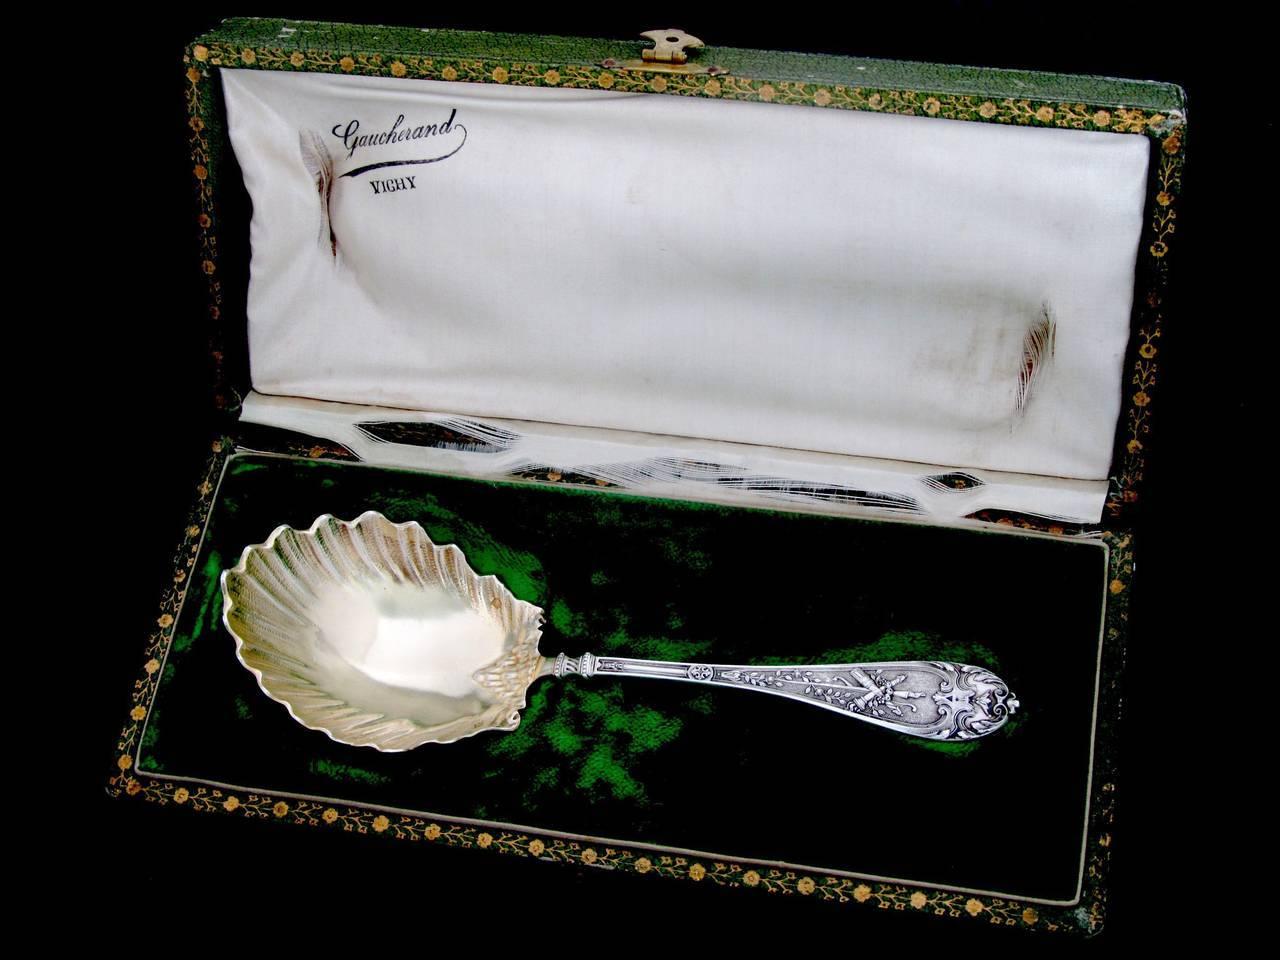 Head of Minerve 1st titre for 950/1000 French sterling silver vermeil guarantee. The quality of the gold used to recover sterling silver is a minimum of 750 mils (18K).

The workmanship of this spoon is exceptional. Silver gilt bowl and neoclassical